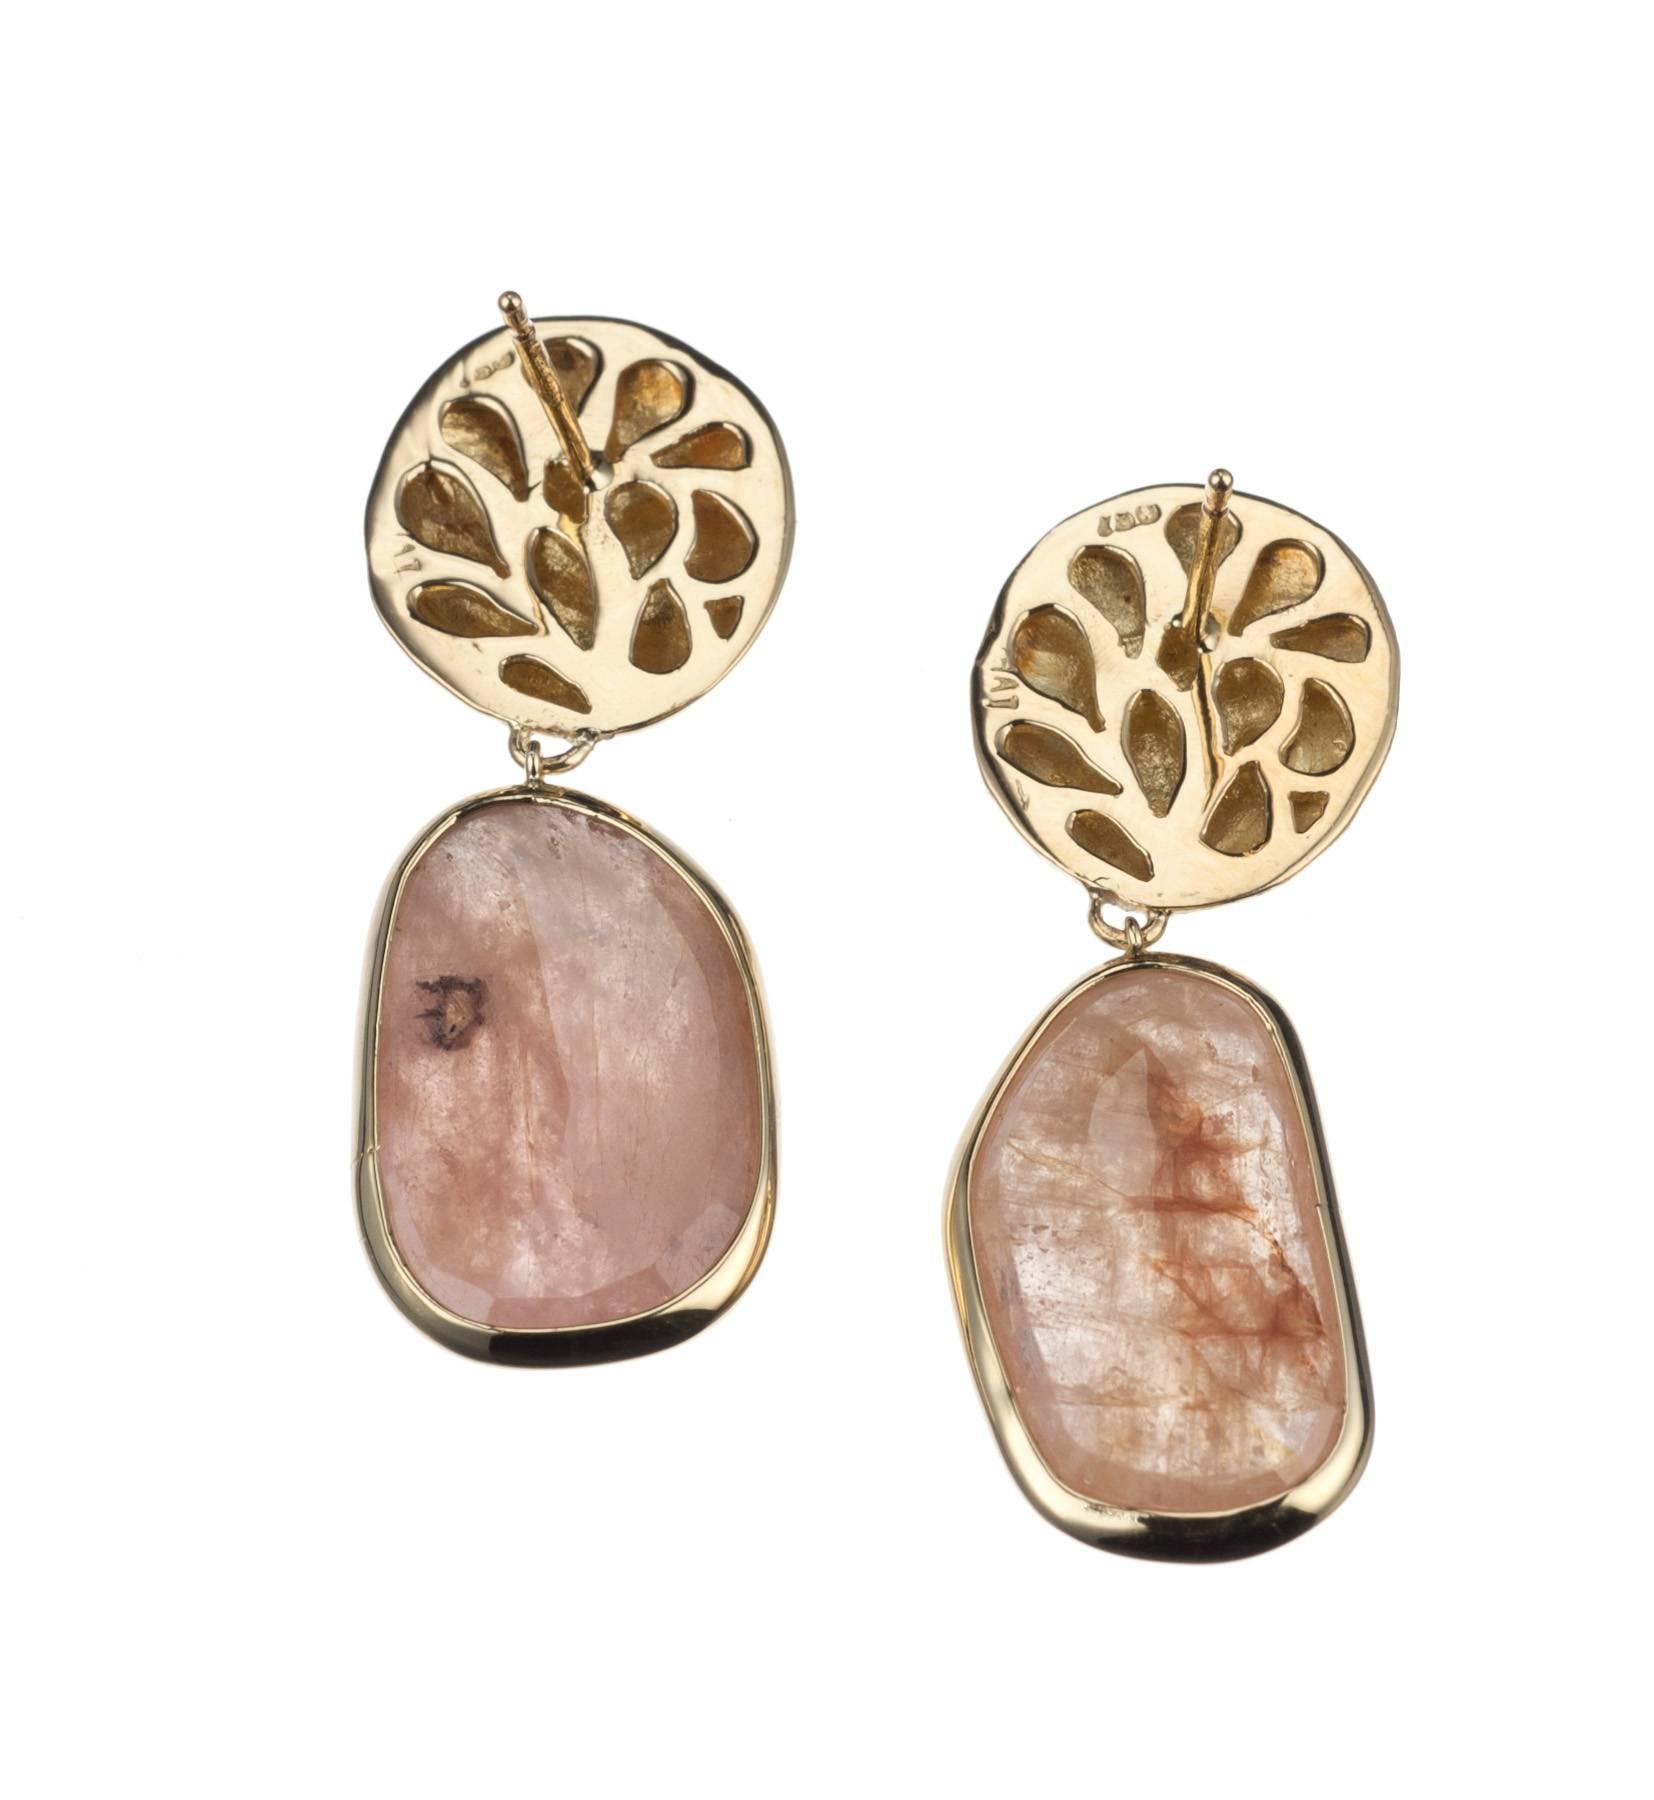 Faceted slices of pink sapphire, 40.00ctw., are suspended from textured buttons of 18-karat yellow gold in this pair of earrings by Israeli designer Yvel. Secured with posts and backs. Earrings measure approx. 1.5” in length.